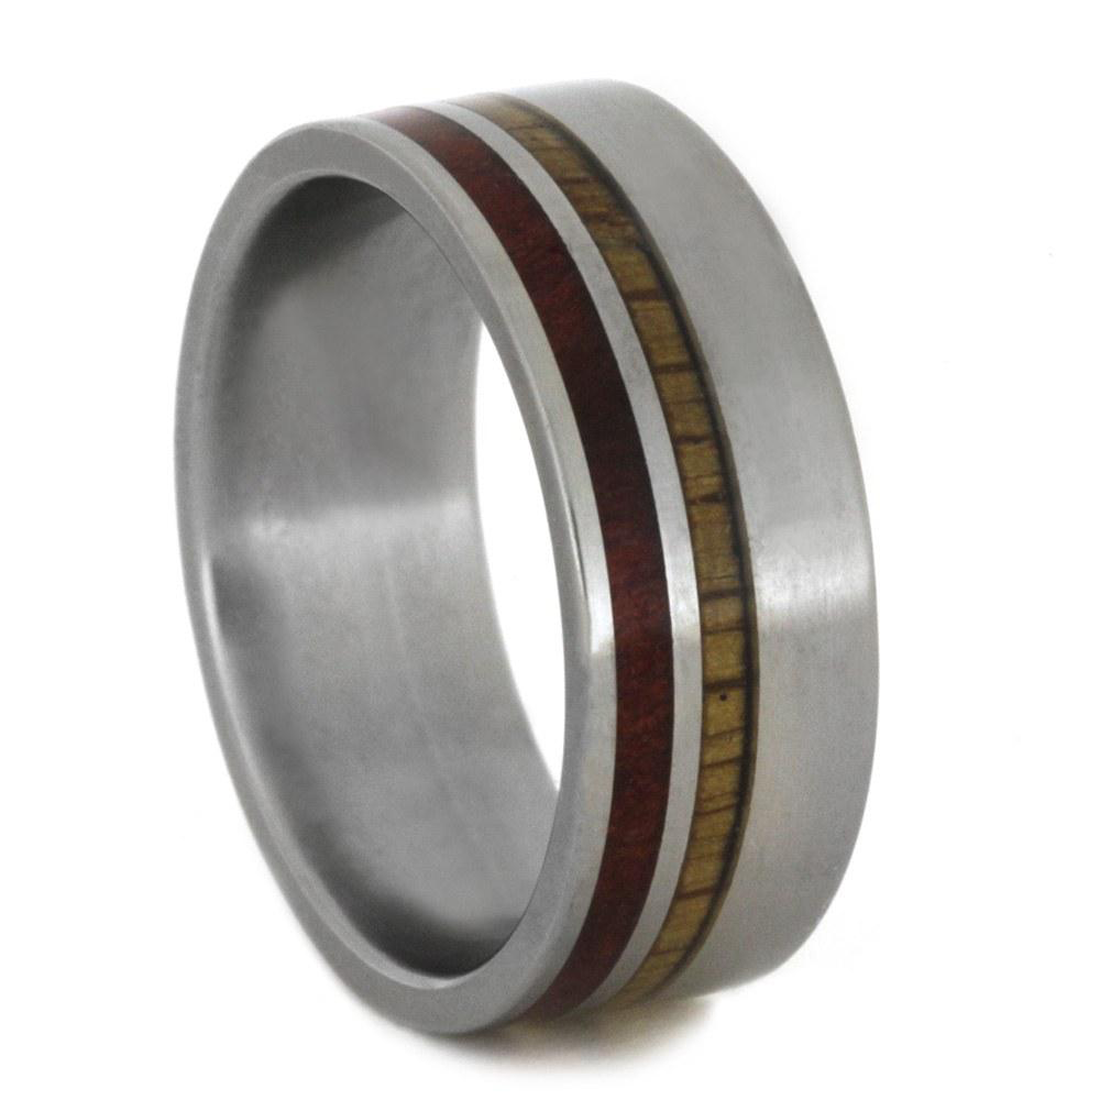 Hand made Amboyna Wood and Oak Wood overlays on an 8.00 millimeter, comfort-fit, matte finished titanium band. 